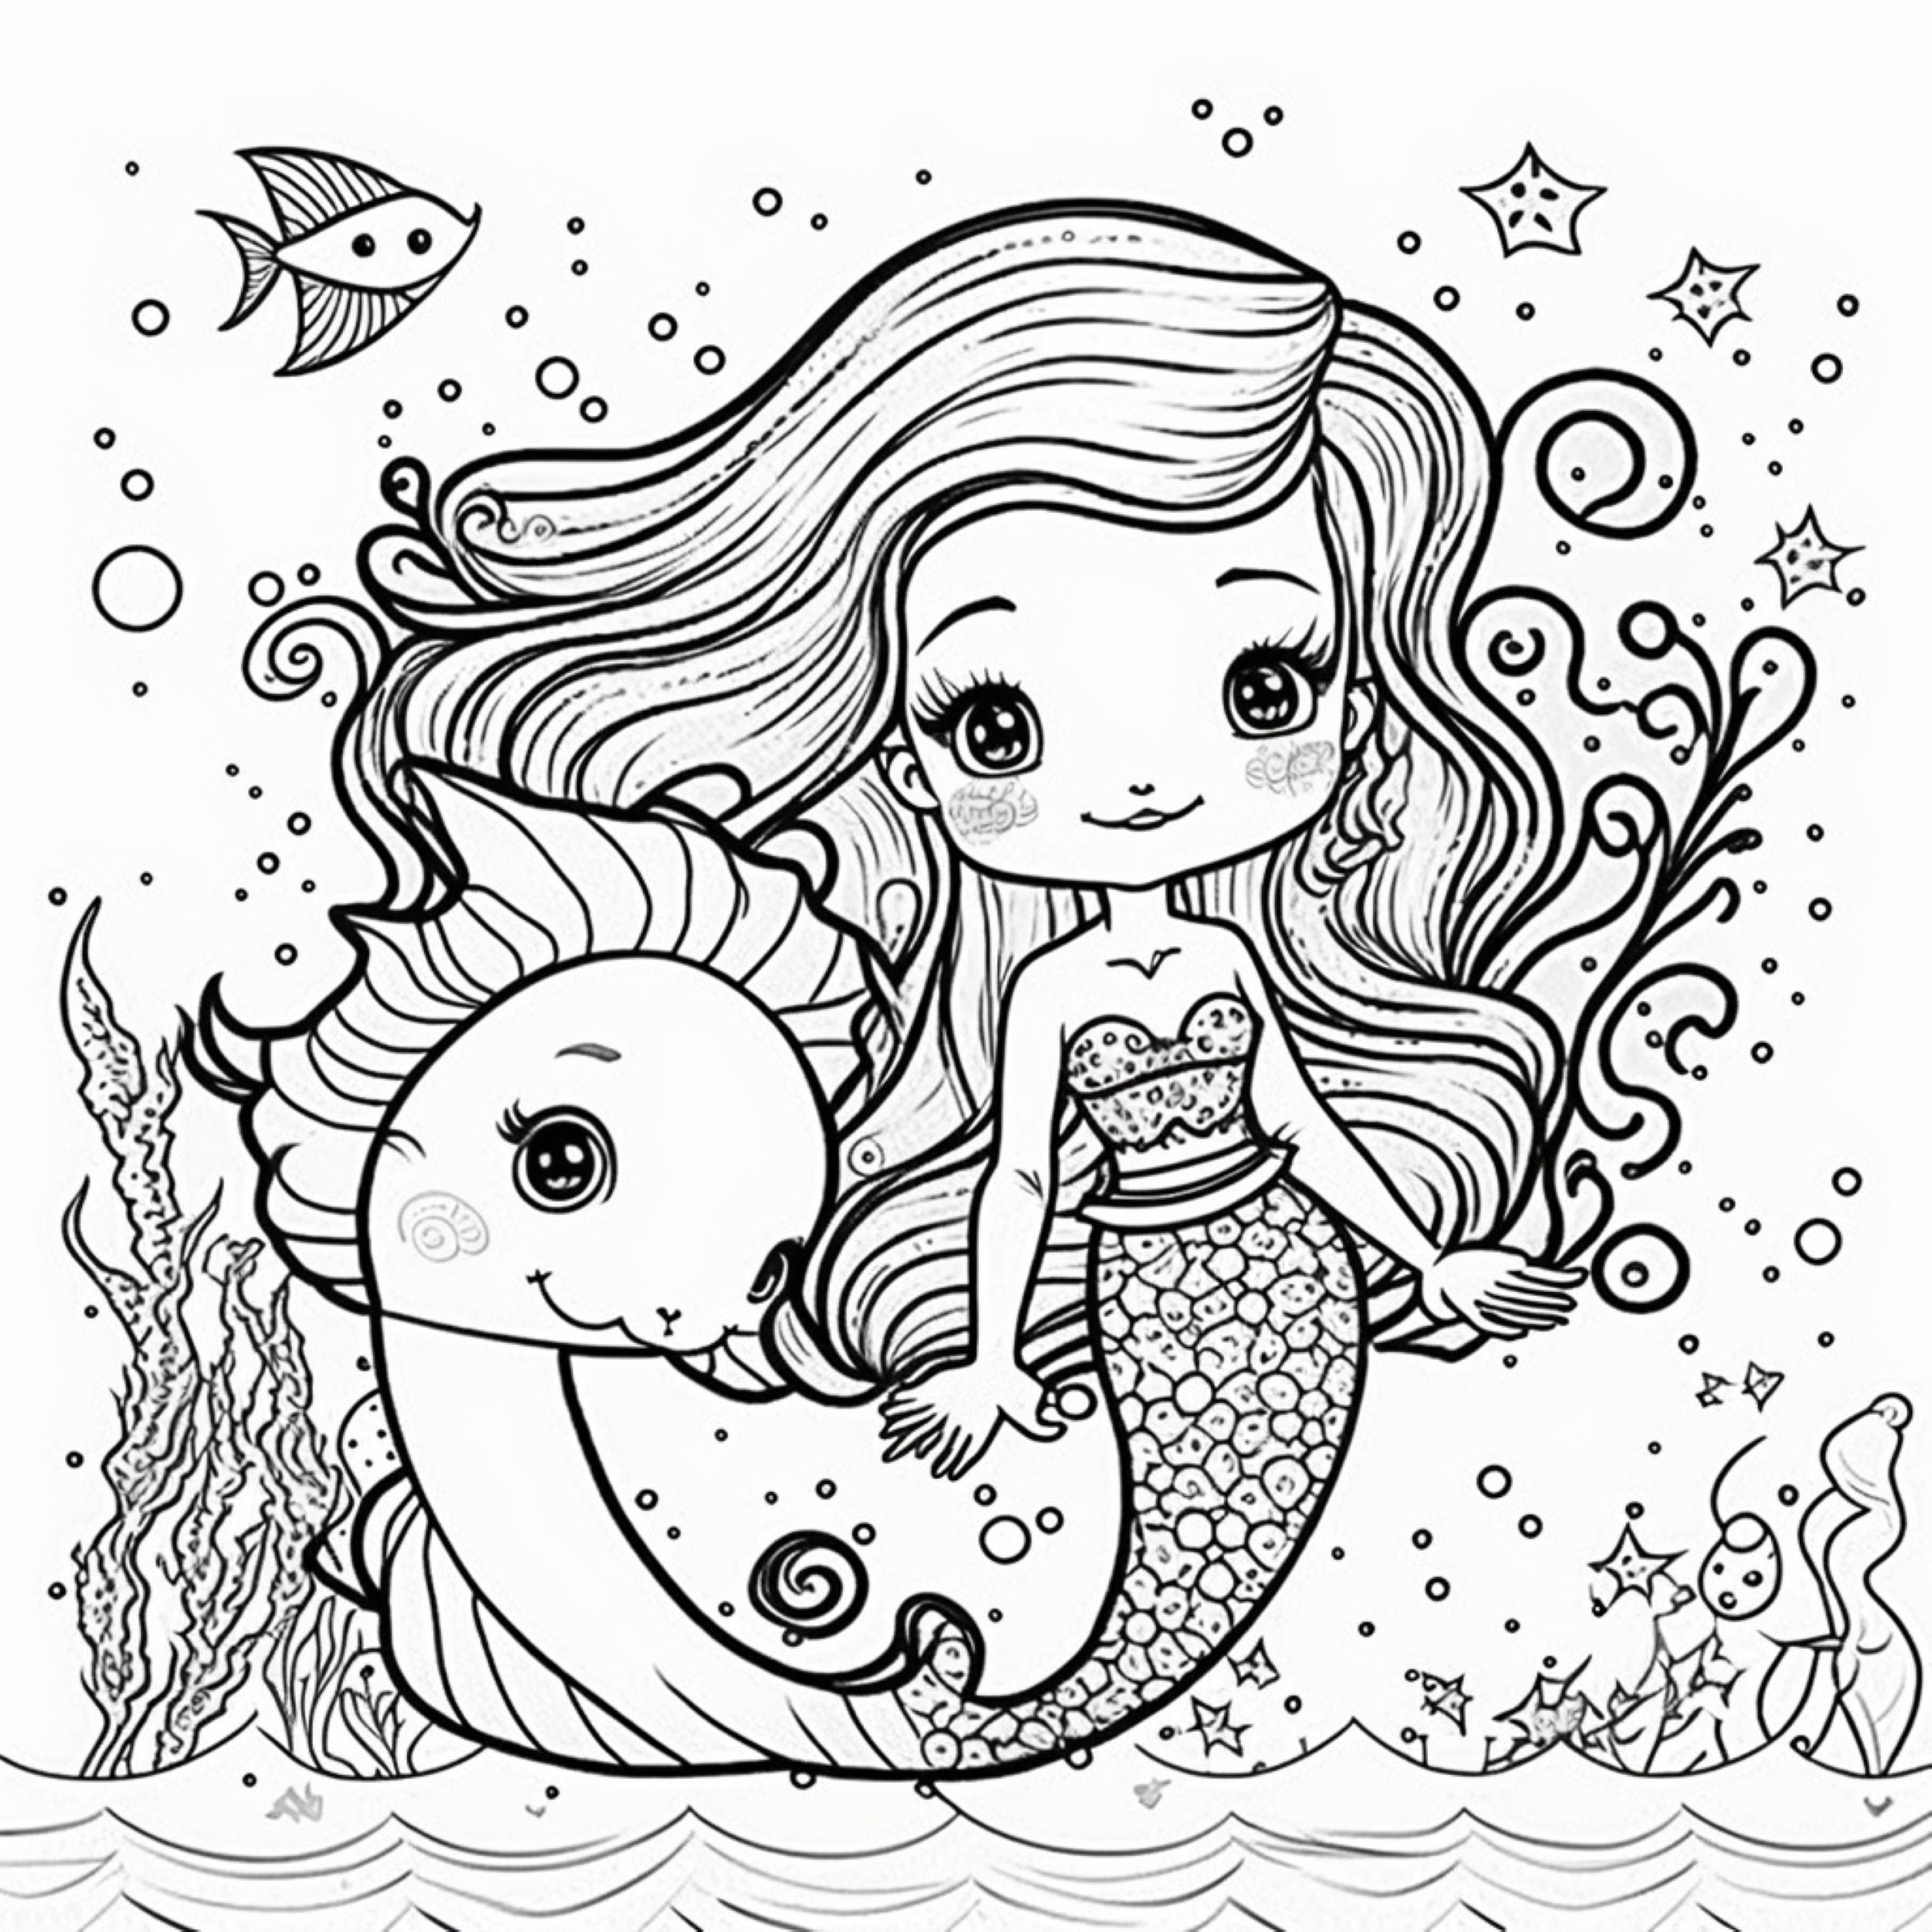 Mermaid 3 Coloring Pages 5 - Etsy